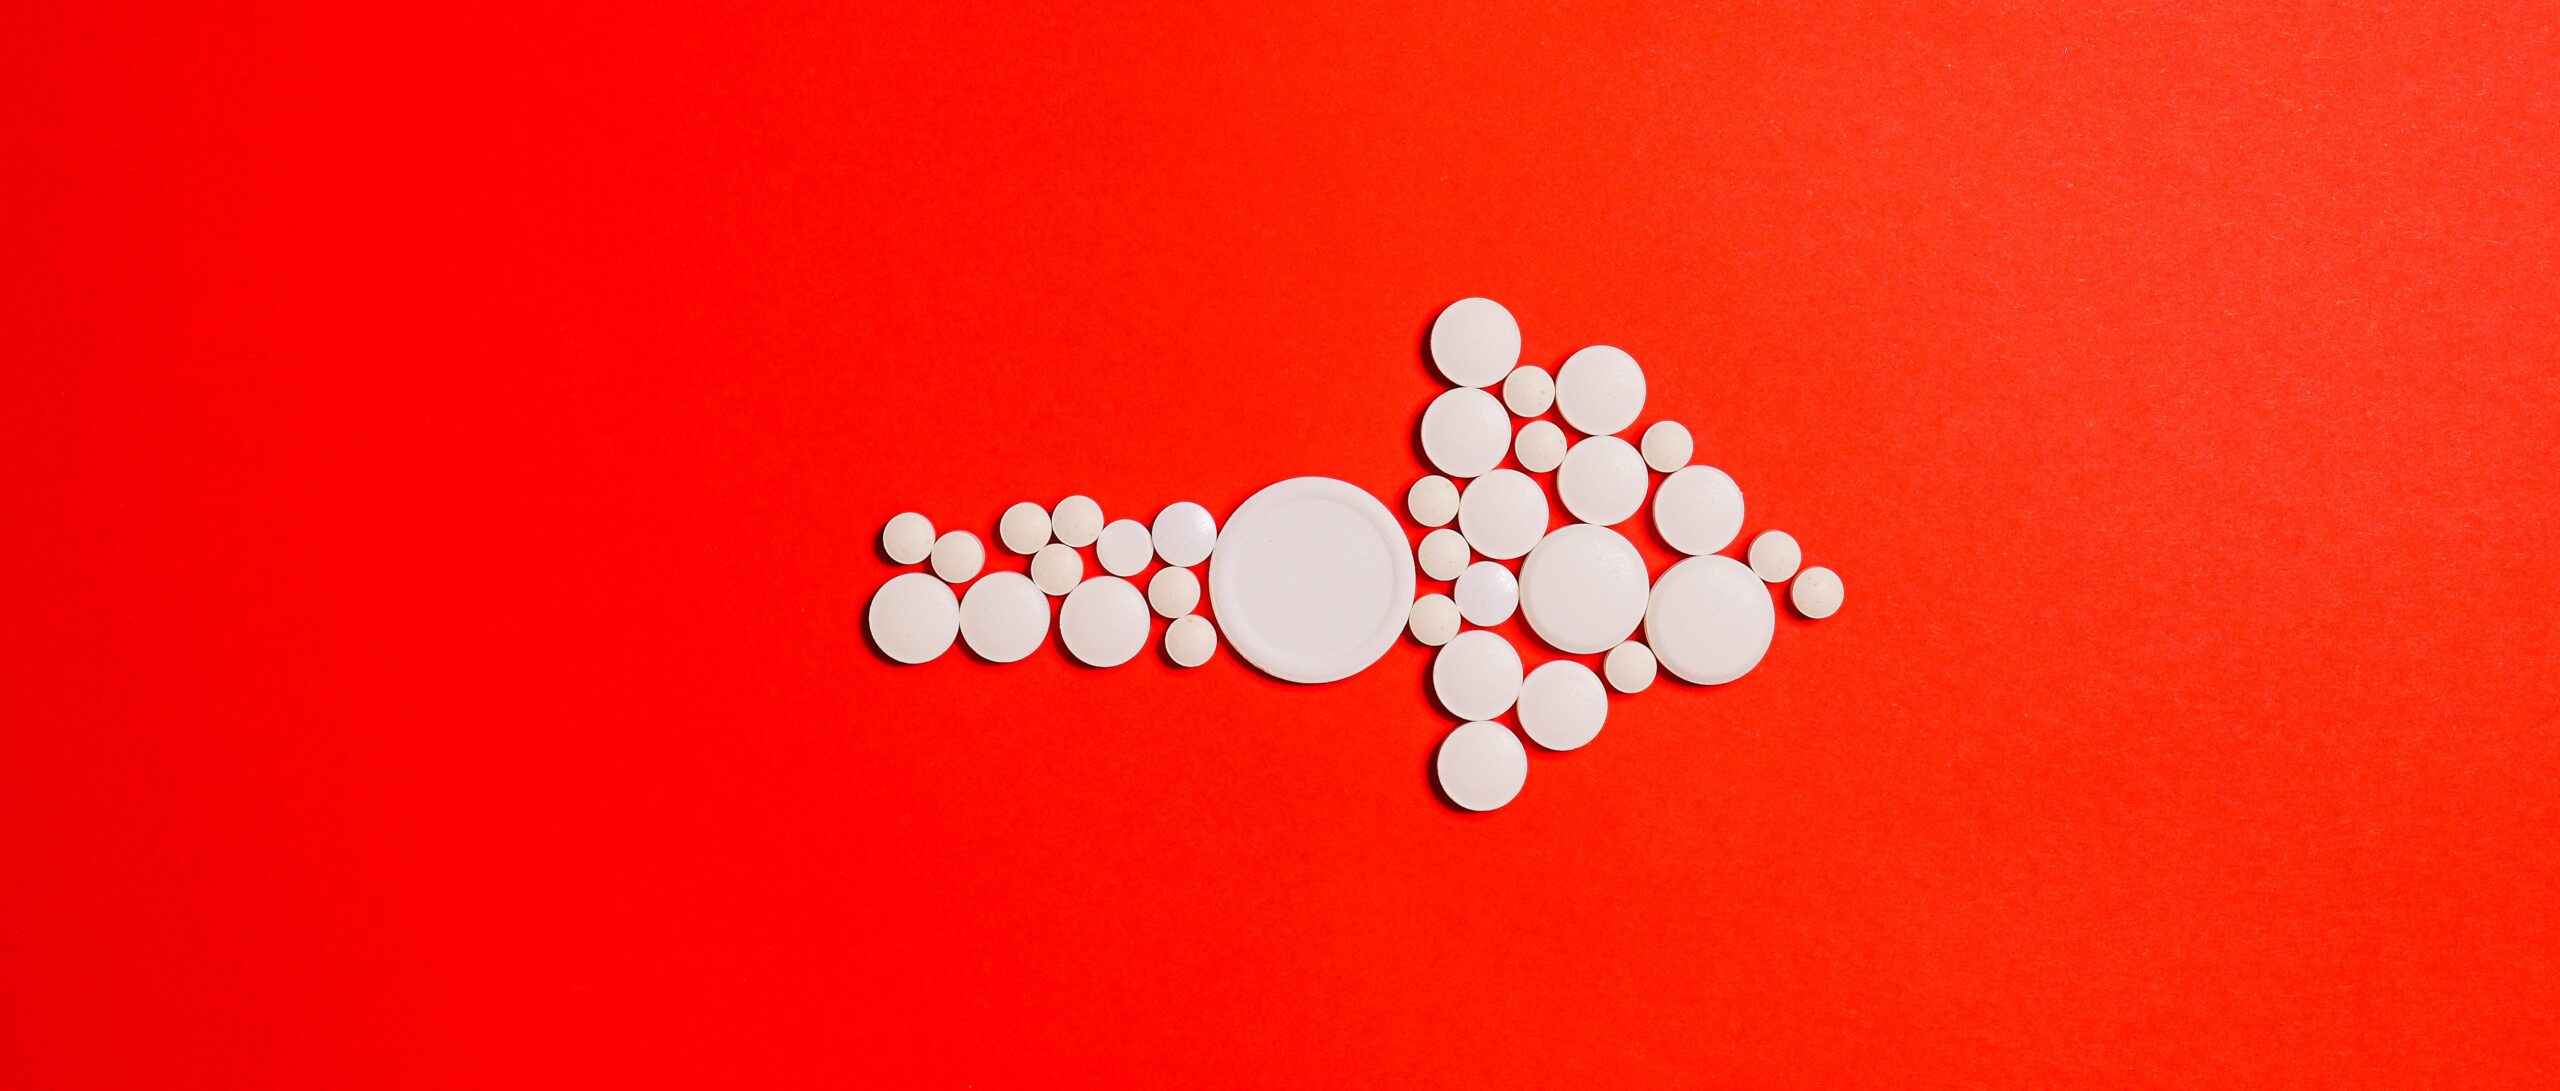 white-round-medication-pill-on-red-surface-3683087